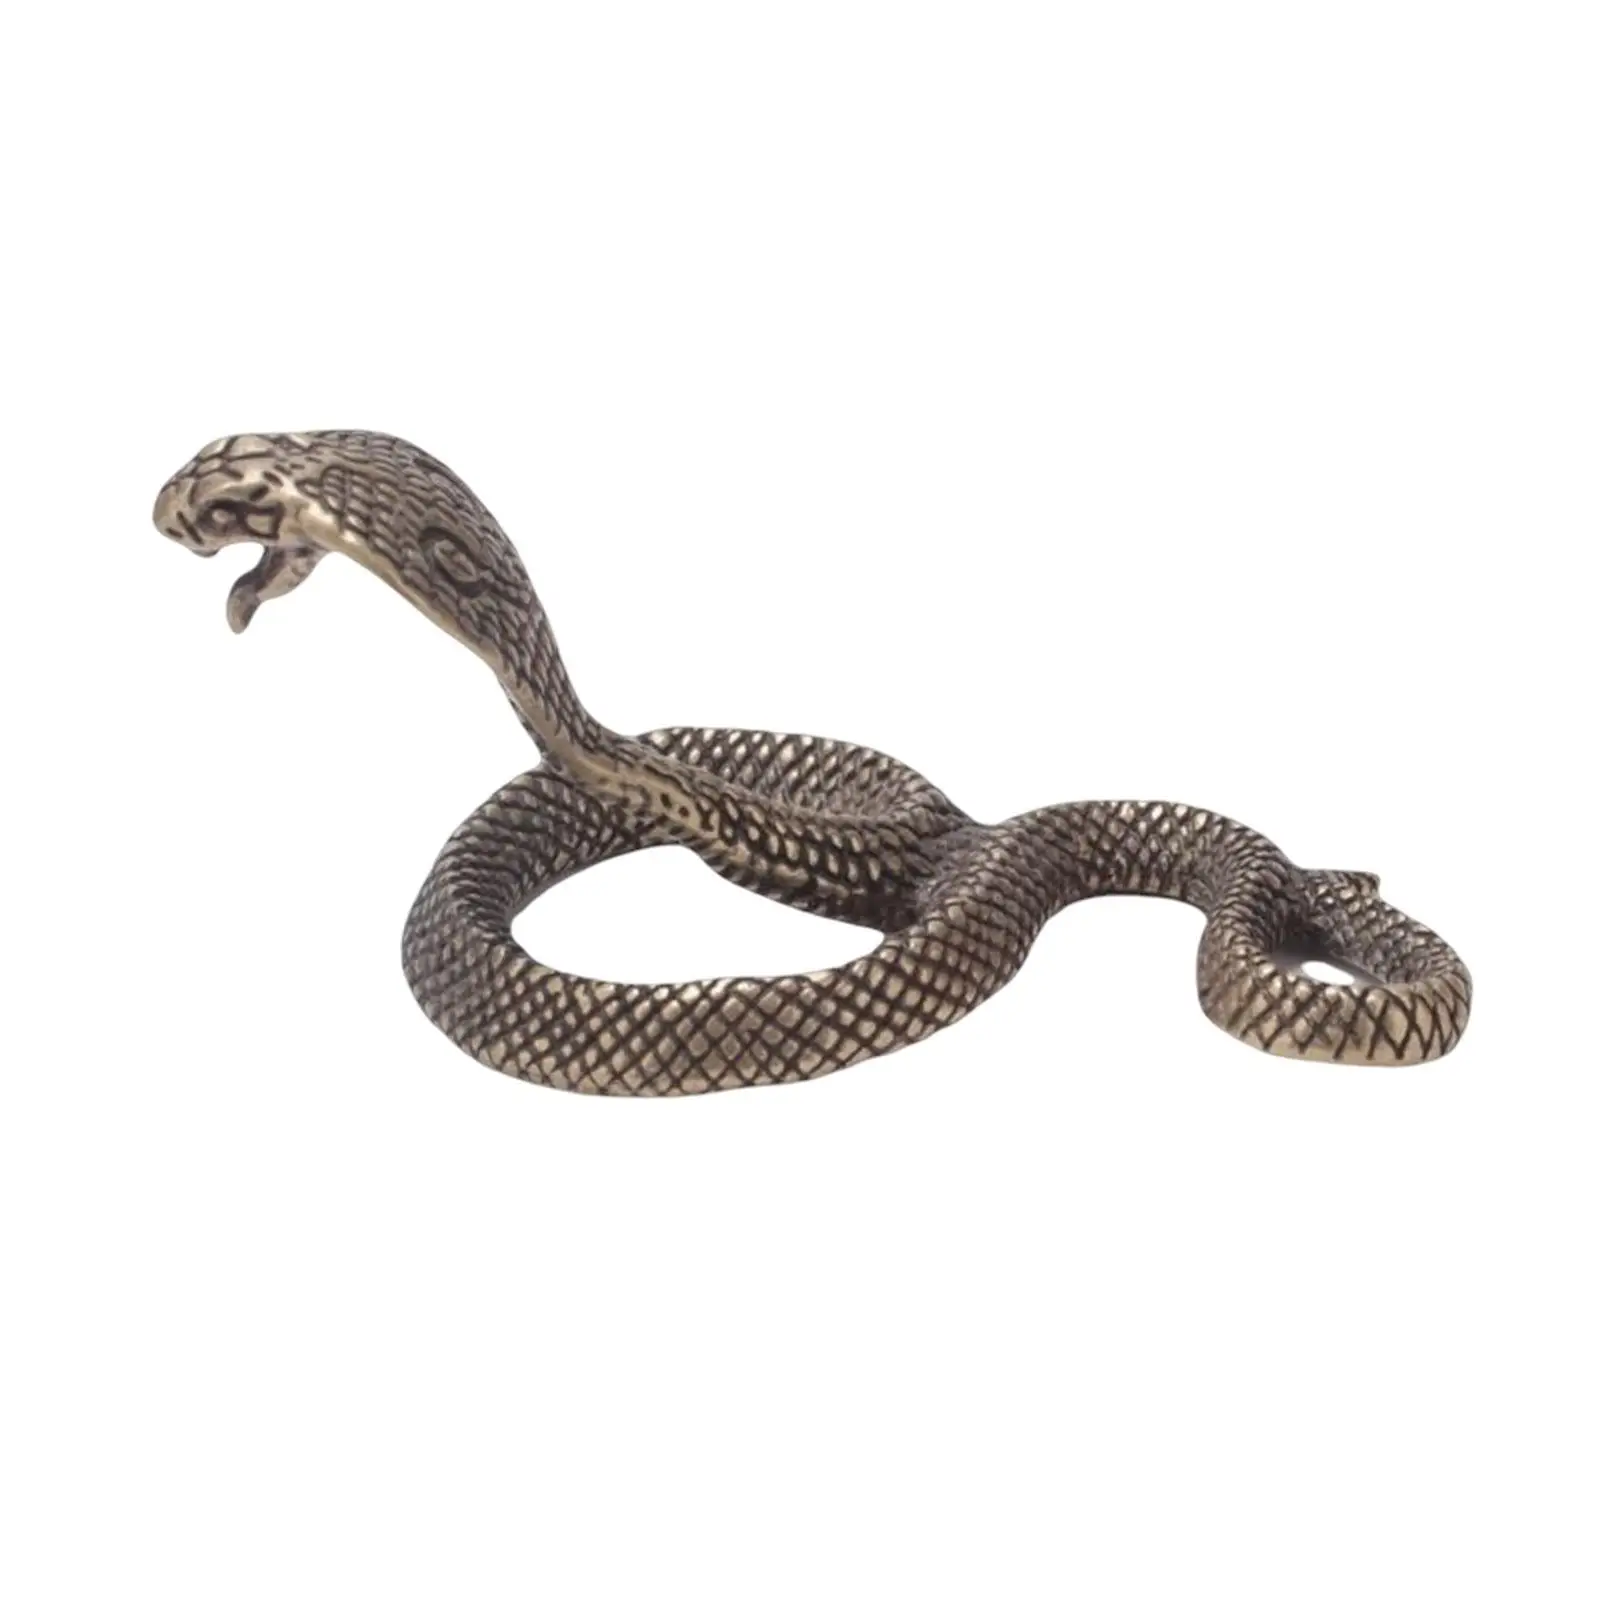 Snake Statue Animal Decoration Craft Collectibles Centerpieces Brass Figurine for Party Table Kitchen